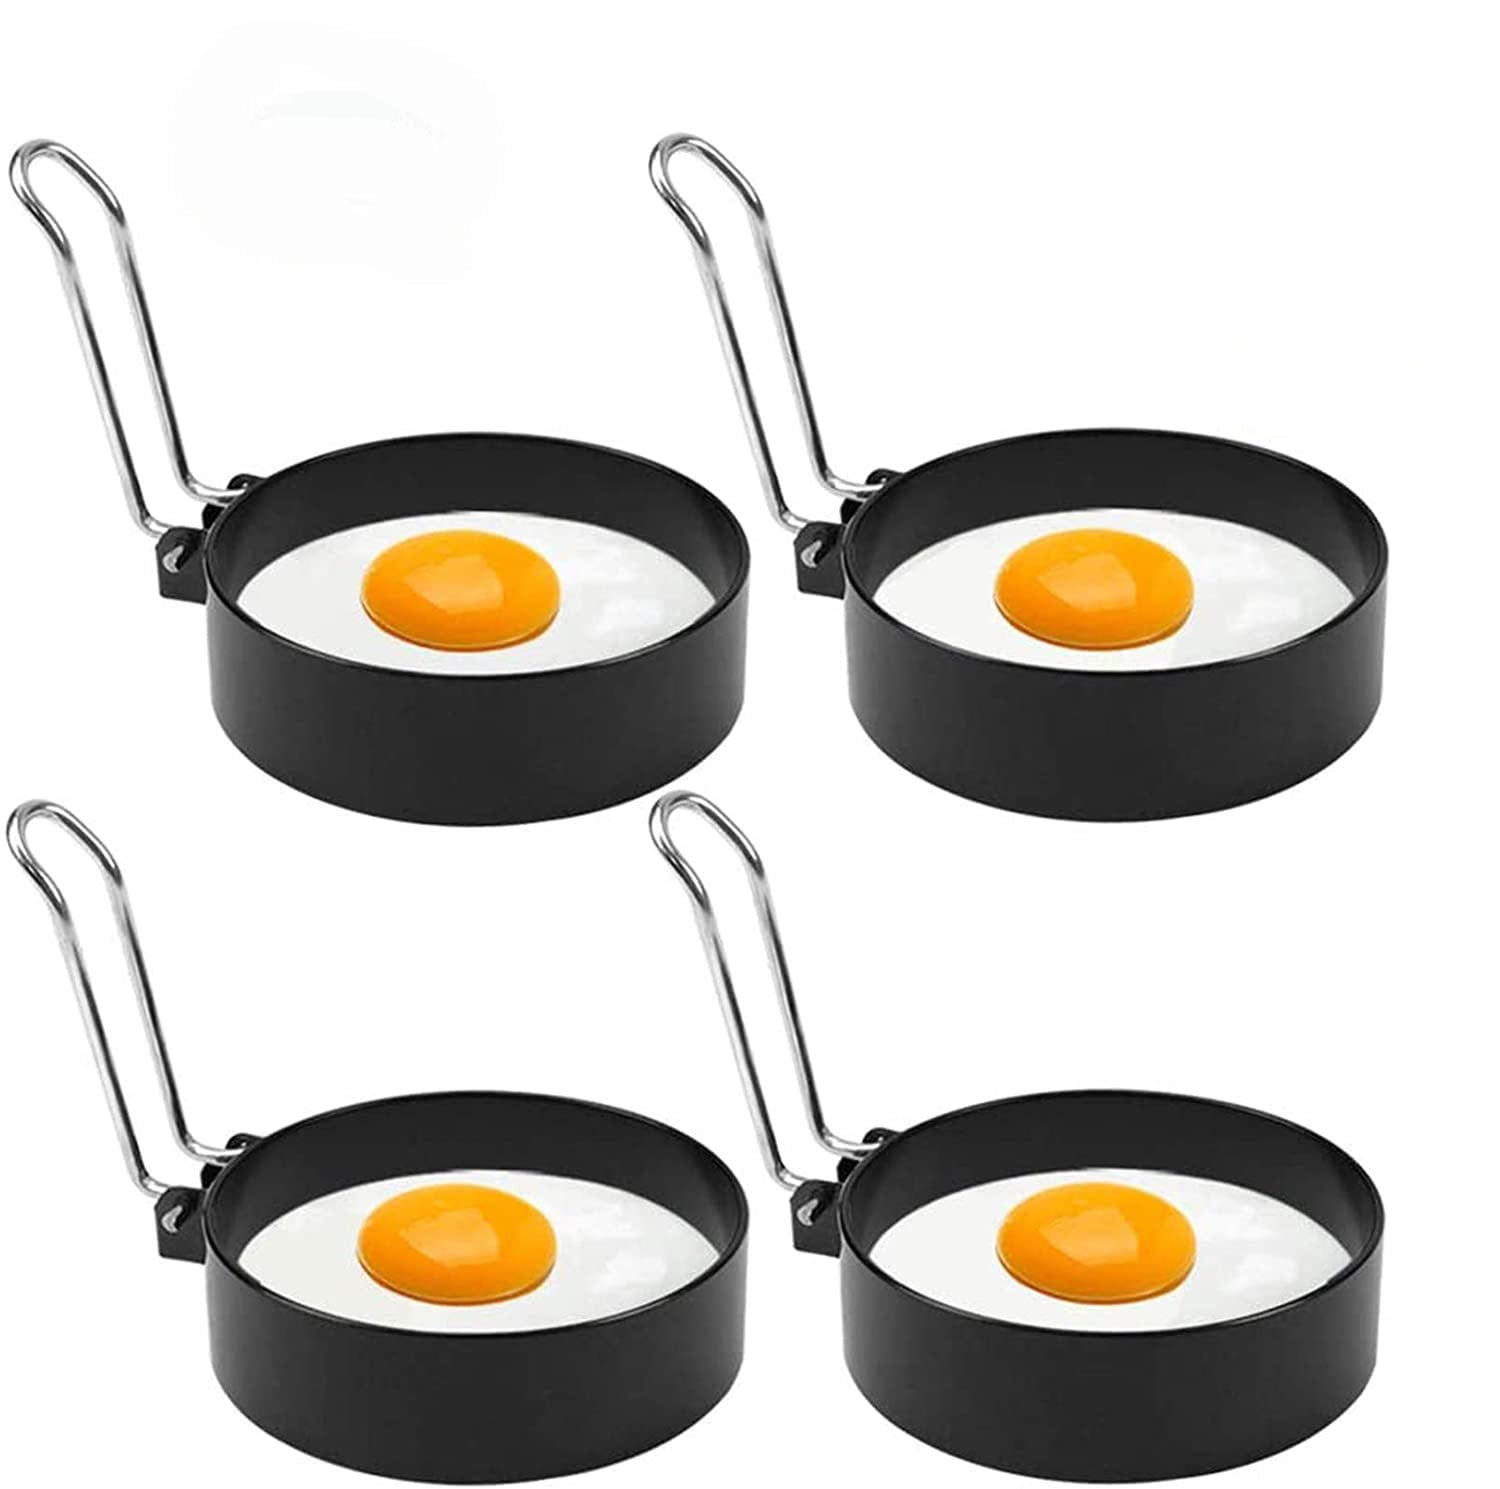 Stainless Steel Pancake Round Mold Ring Cooking Fried Egg Shaper Kitchen Tool XI